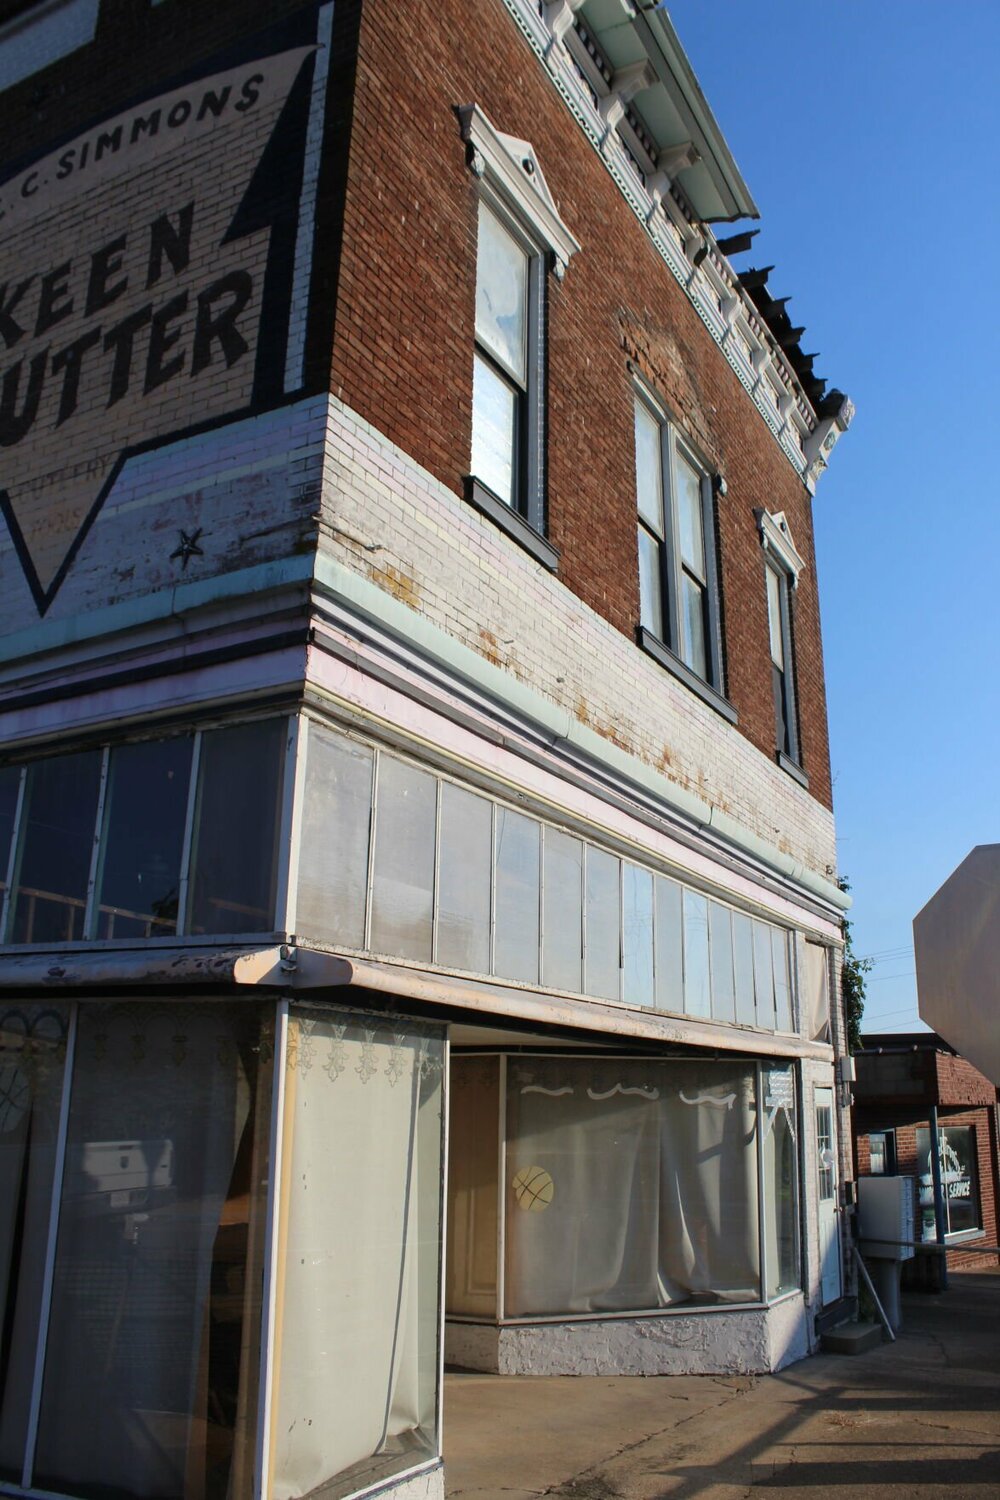 The Community Foundation of Willow Springs, with financial help from the city, is working to preserve and improve the historic McClellan building at the corner of Main and Center streets in Willow Springs. The two-story building bearing brick walls with timber floors was constructed in the 1890s.